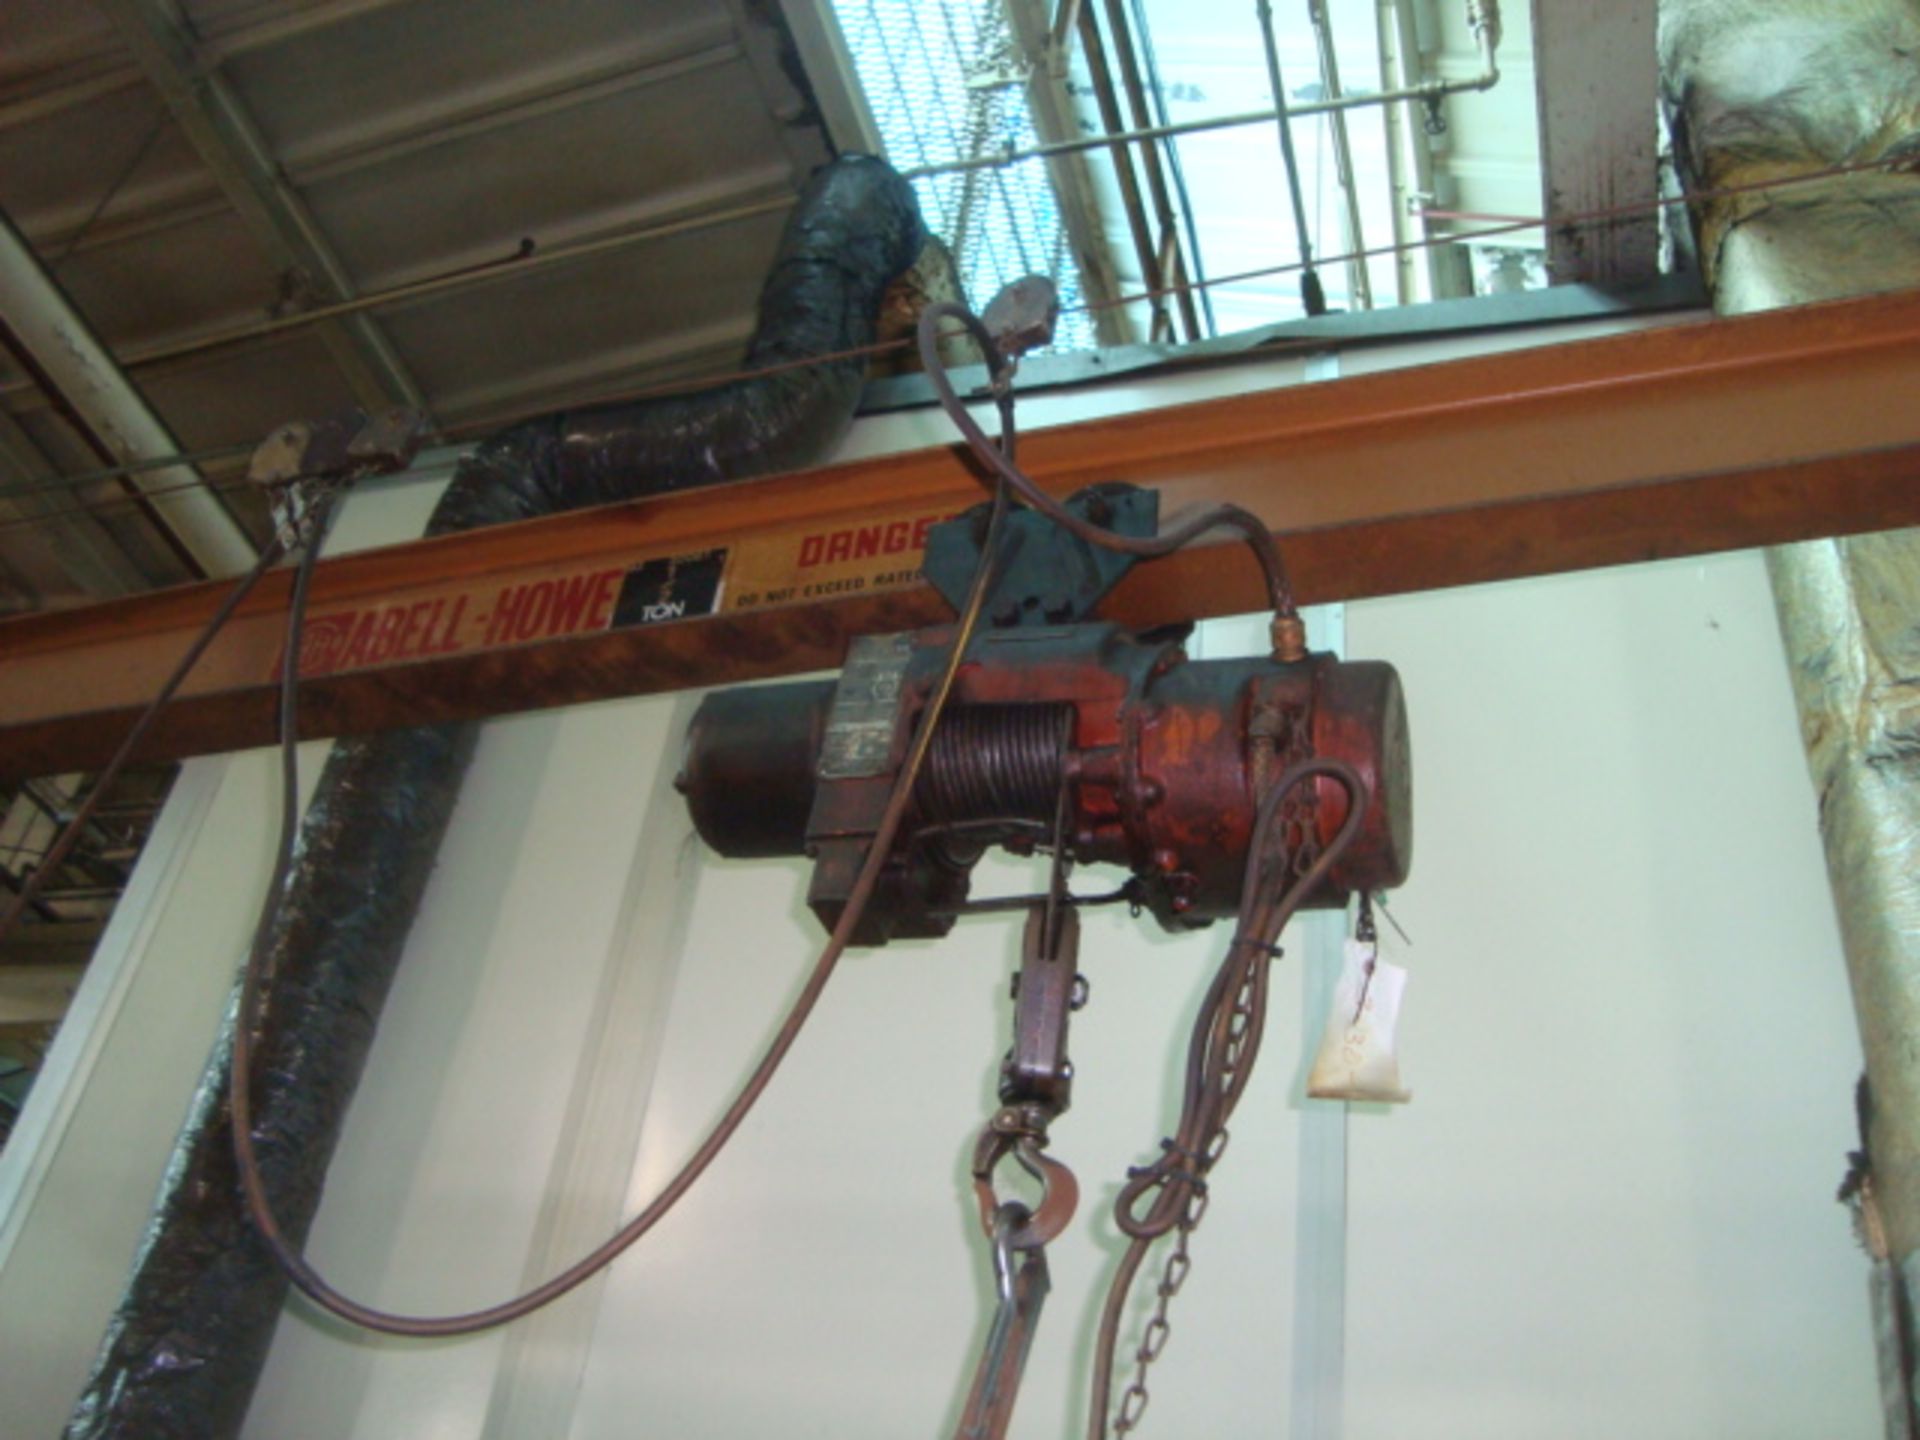 Abell- Howe 1/2-Ton Capacity Jib Crane With Yale 1/2-Ton Cable Hoist, Approx. 12' Span Reach With - Image 2 of 5